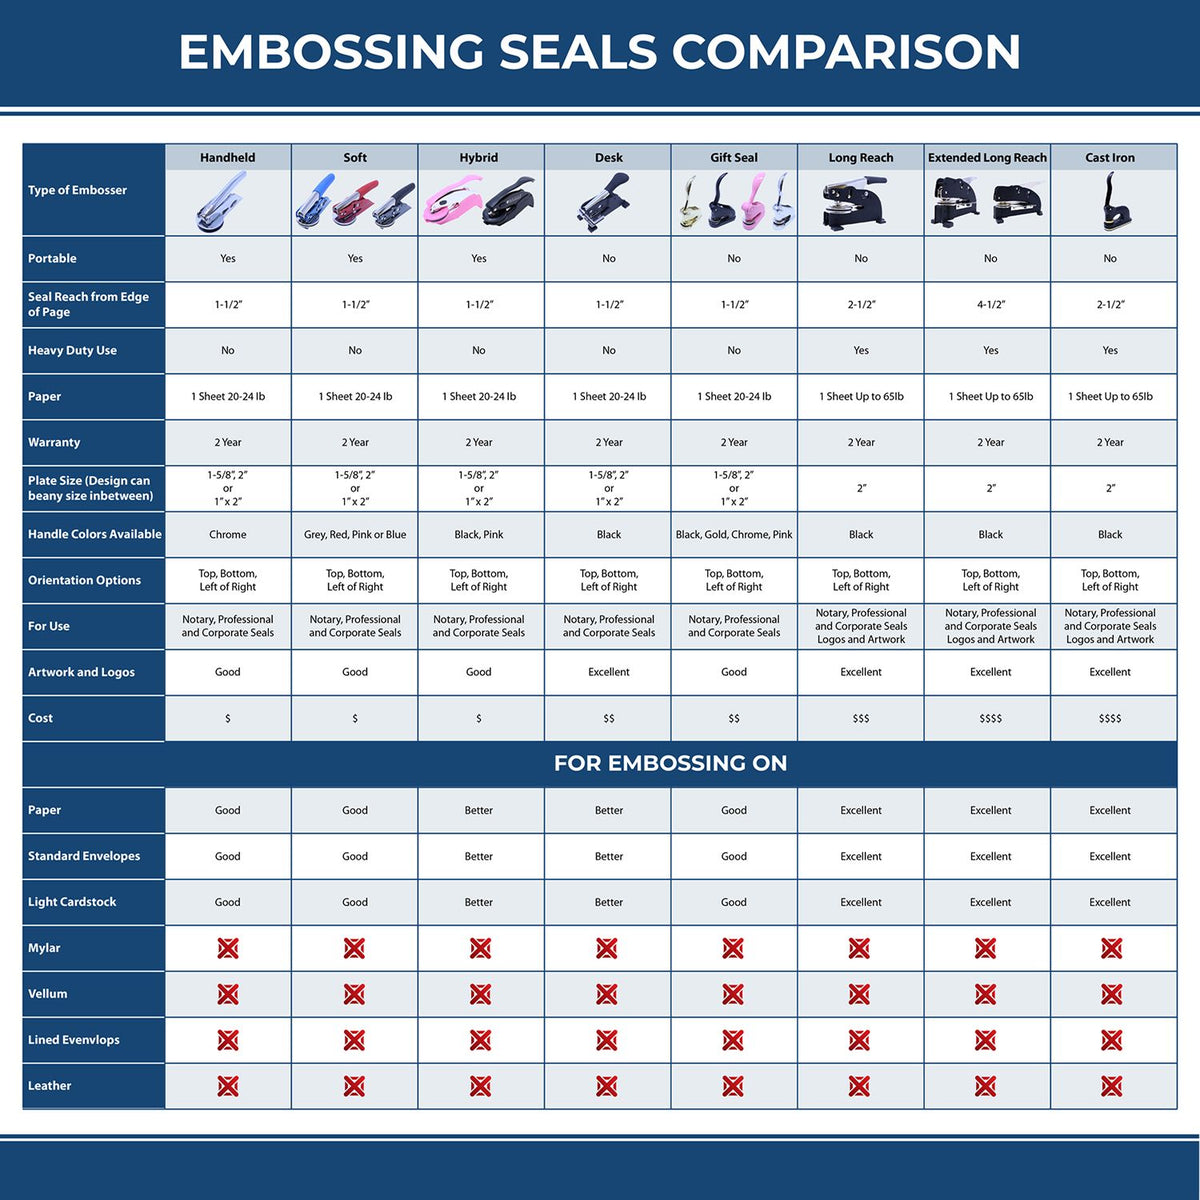 A comparison chart for the different types of mount models available for the Extended Long Reach Florida Surveyor Embosser.